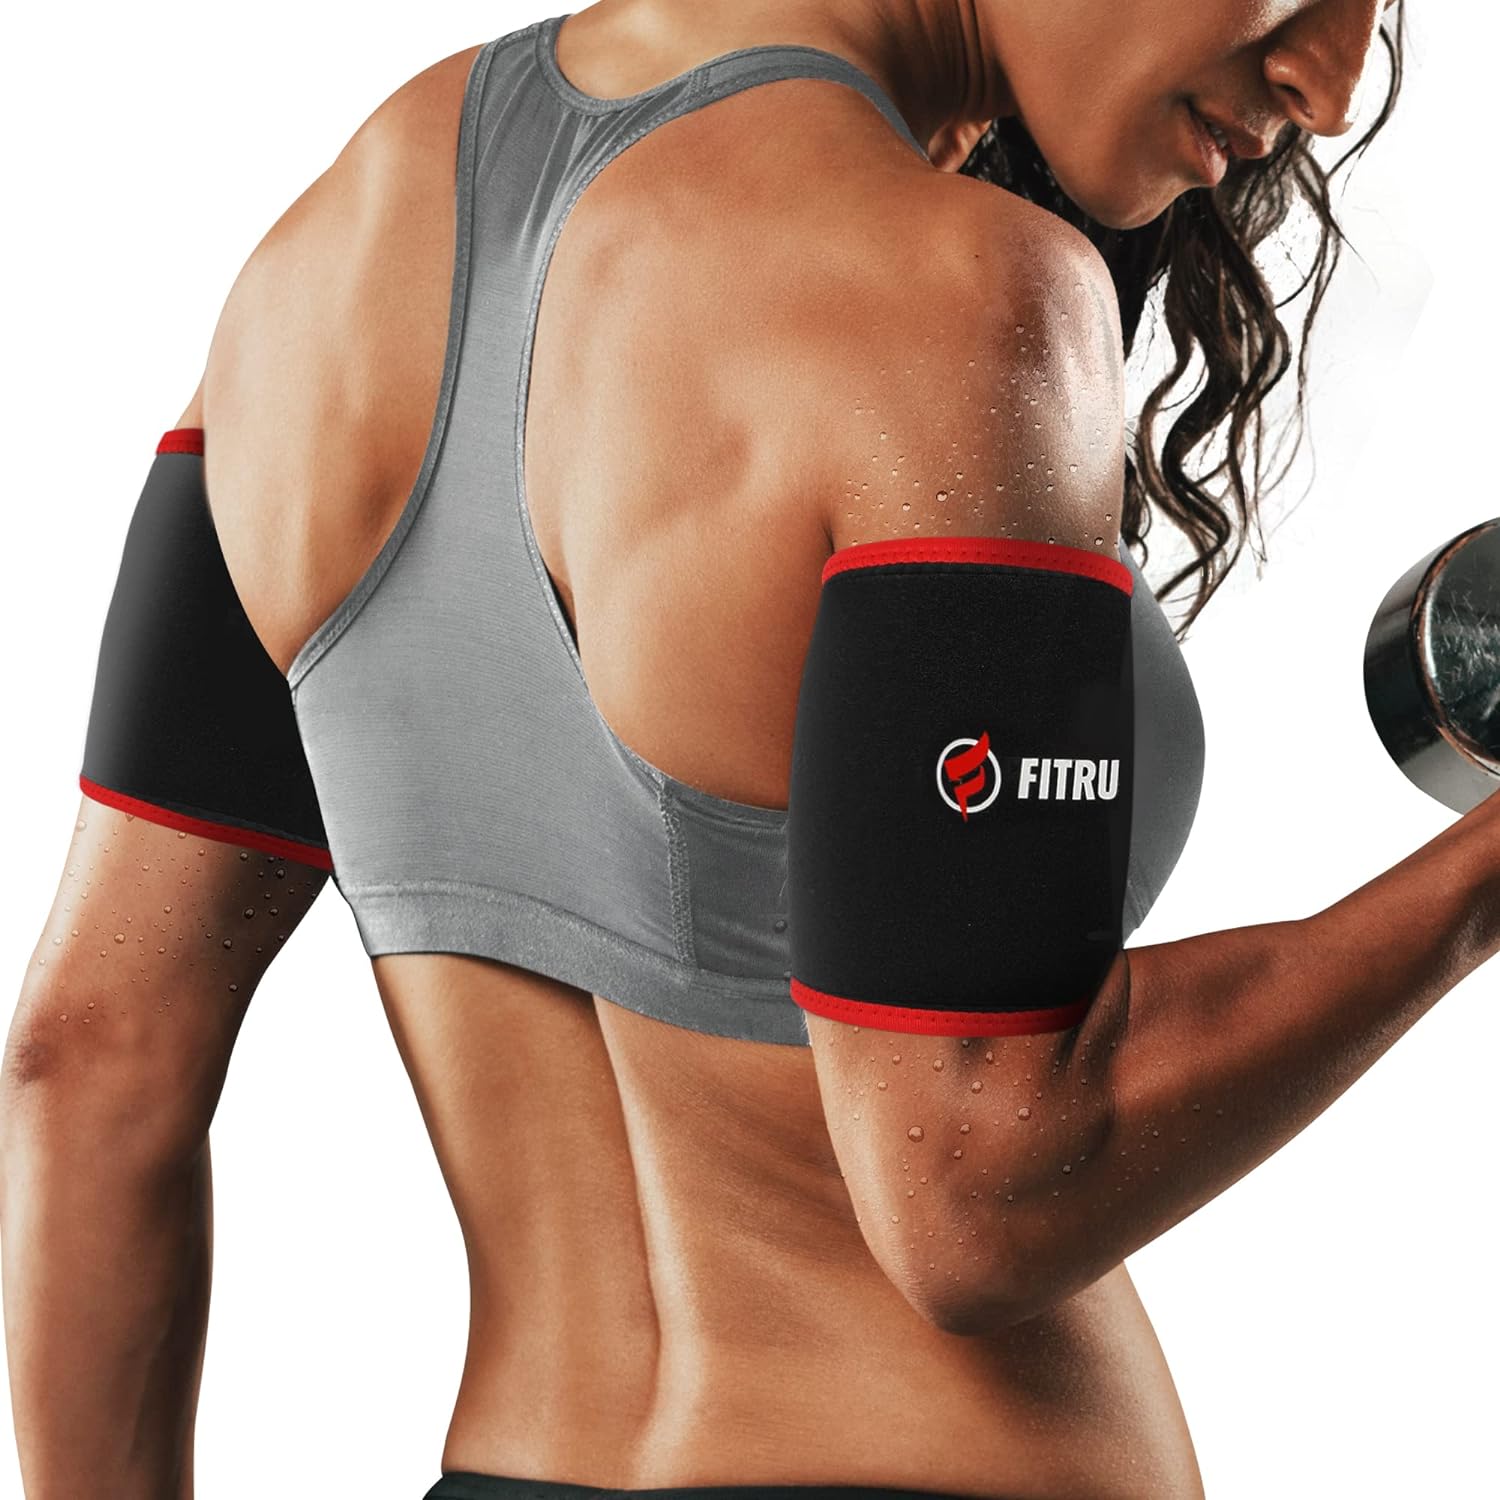 Fitru Premium Arm Trimmers for Men Women | Sauna Arm Wraps for Flabby Arms Increasing Heat Sweat During Exercise